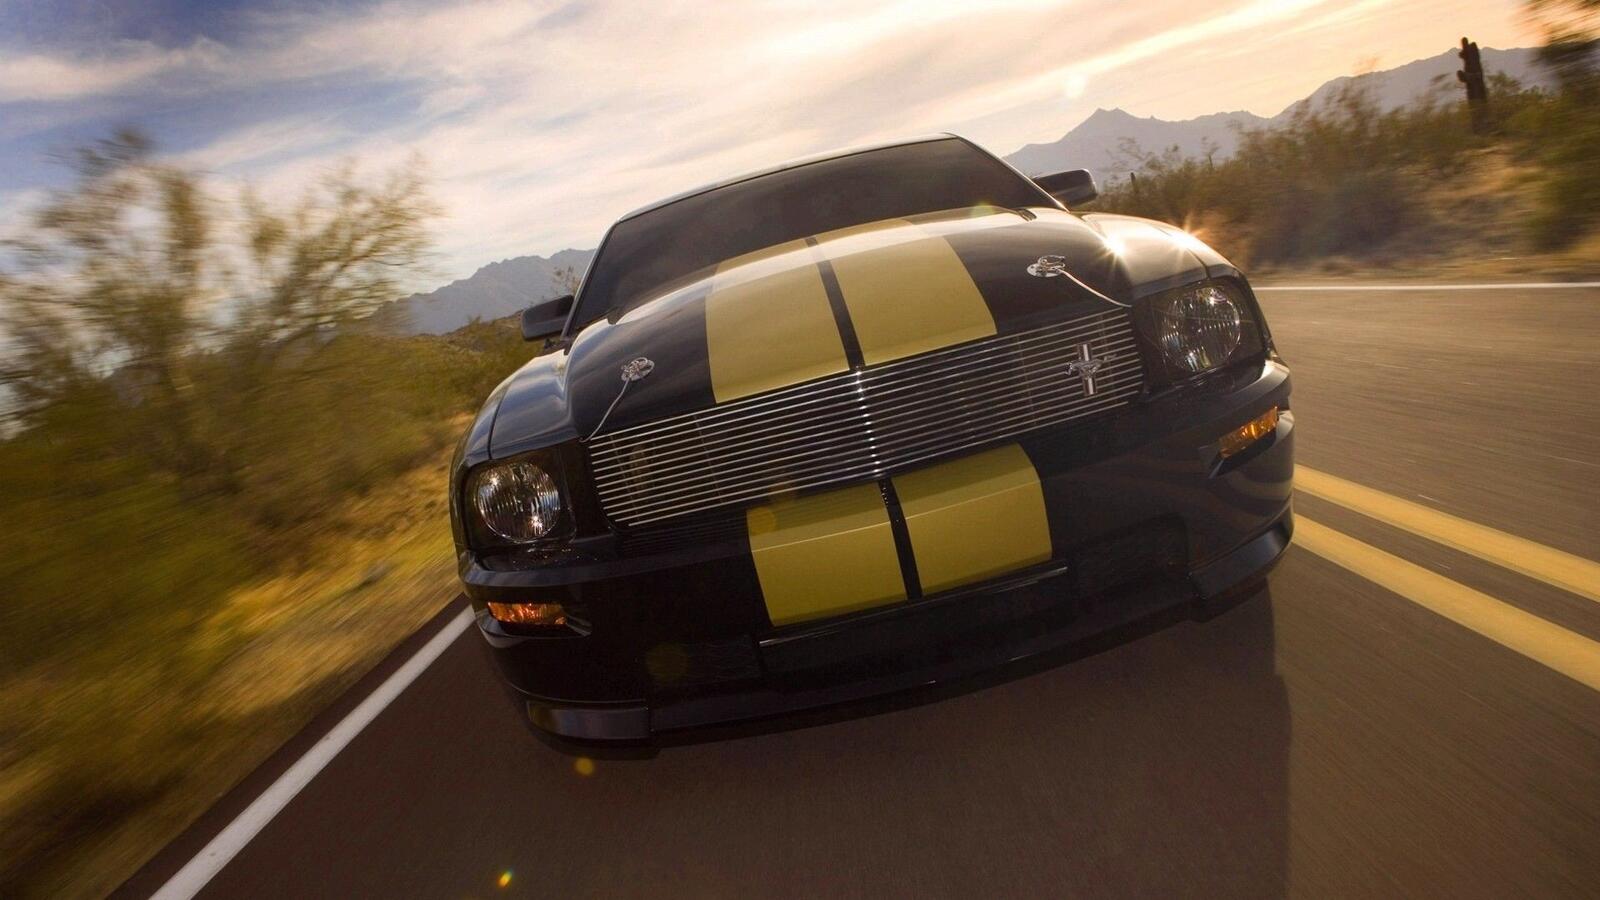 Free photo Shelby mustang with yellow stripes on the hood